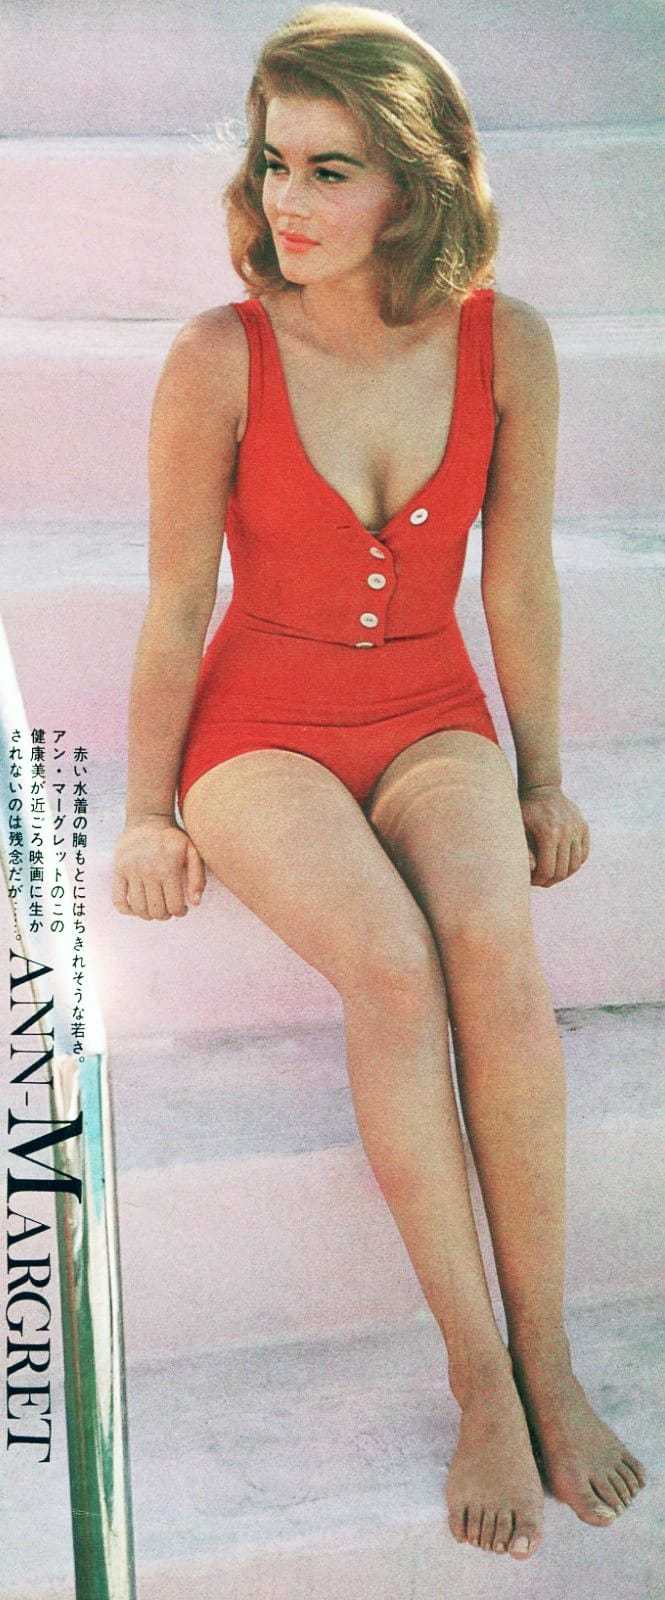 65+ Ann-Margret Hot Pictures Are Too Delicious For All Her Fans | Best Of Comic Books